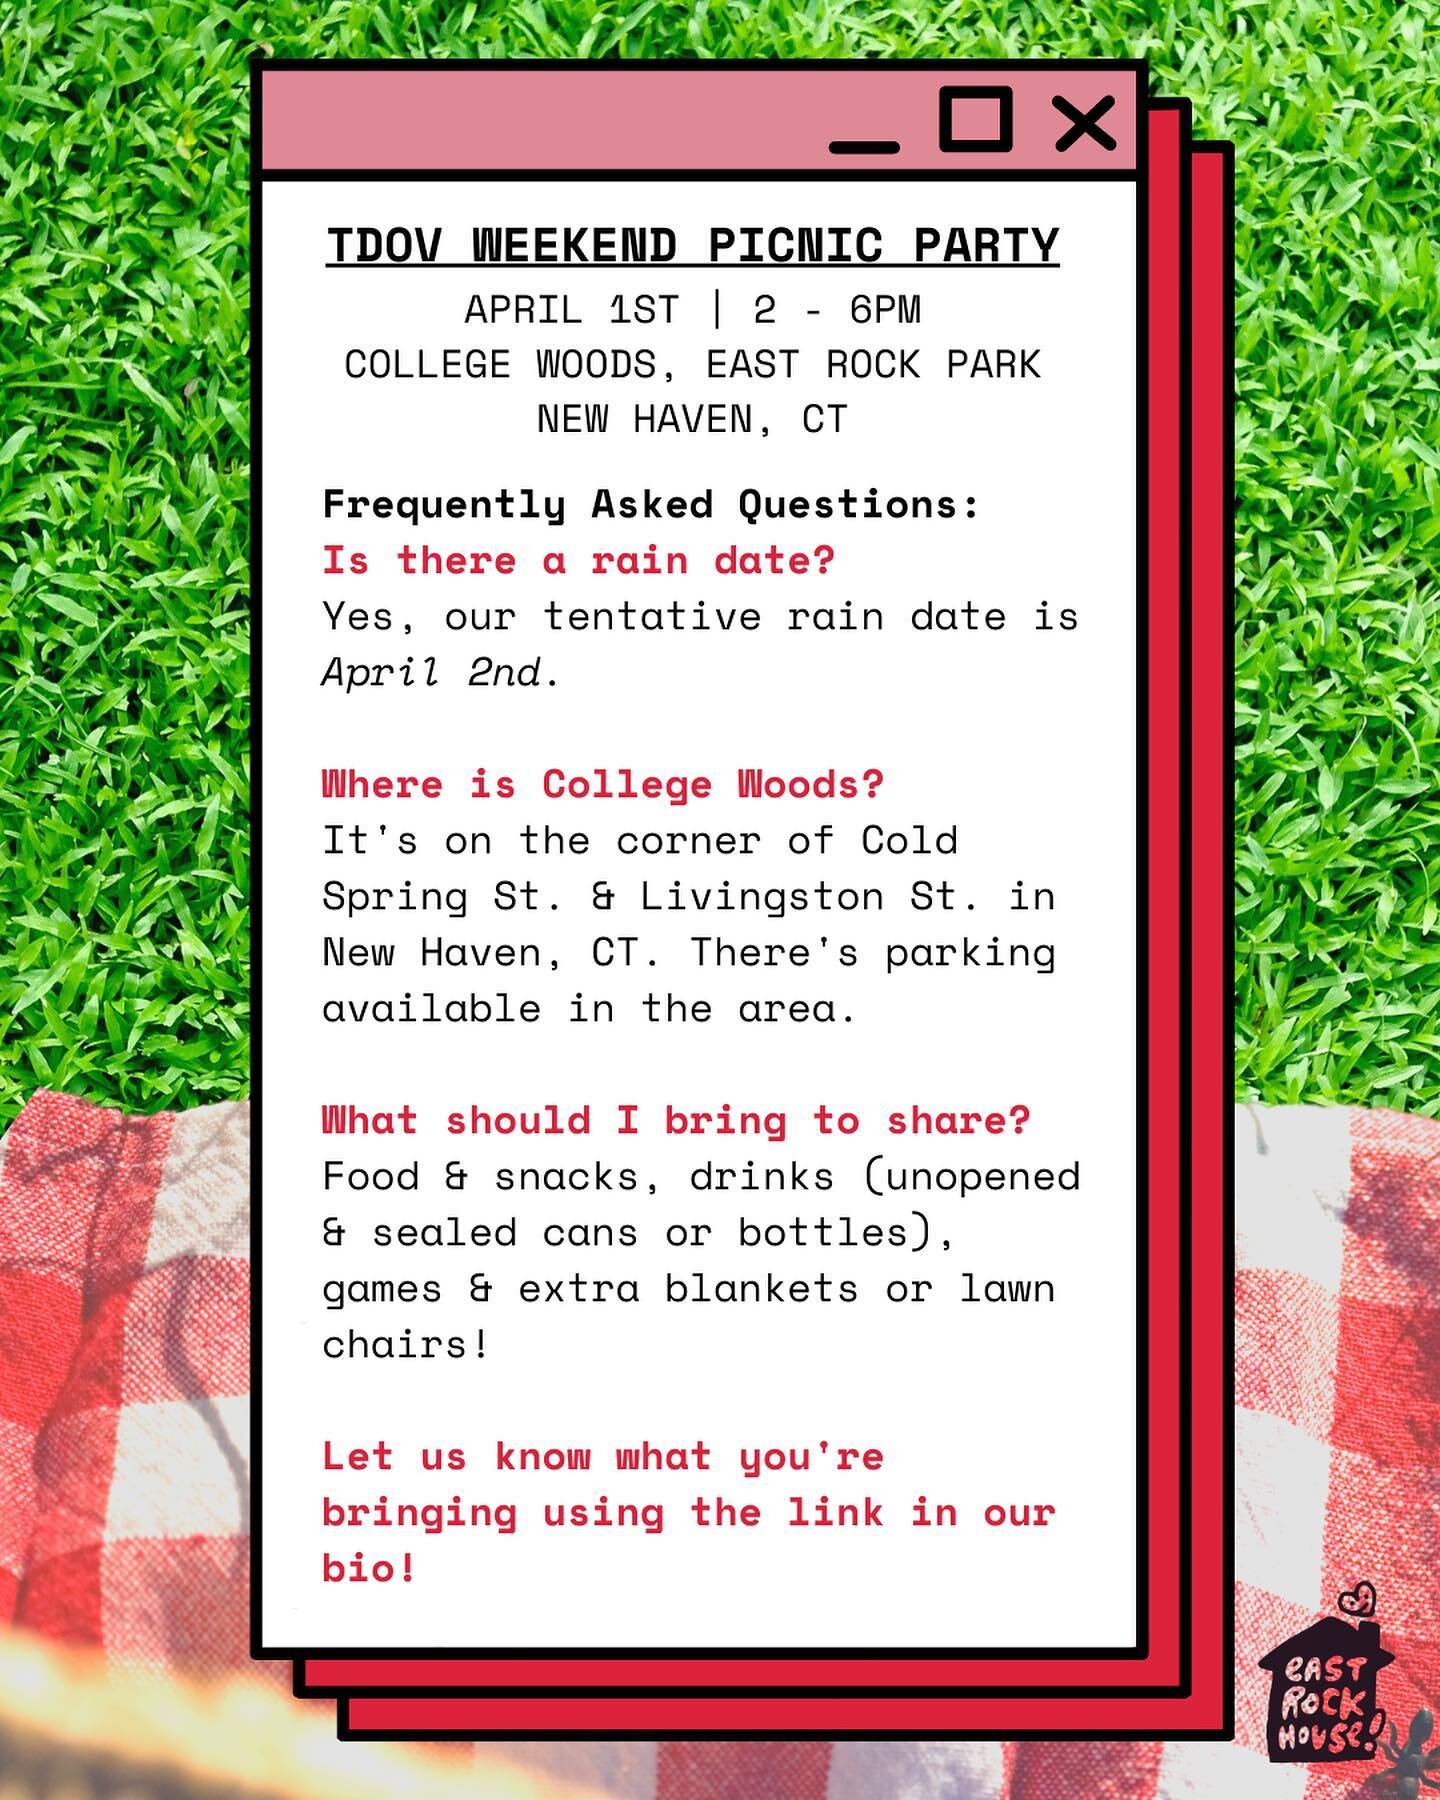 TDOV Weekend Picnic Party is&hellip; well, this weekend! Here are some frequently asked questions answered! We&rsquo;re so excited to commune with y&rsquo;all! More details available on our site - link in bio! Come through, bring a friend, &amp; some